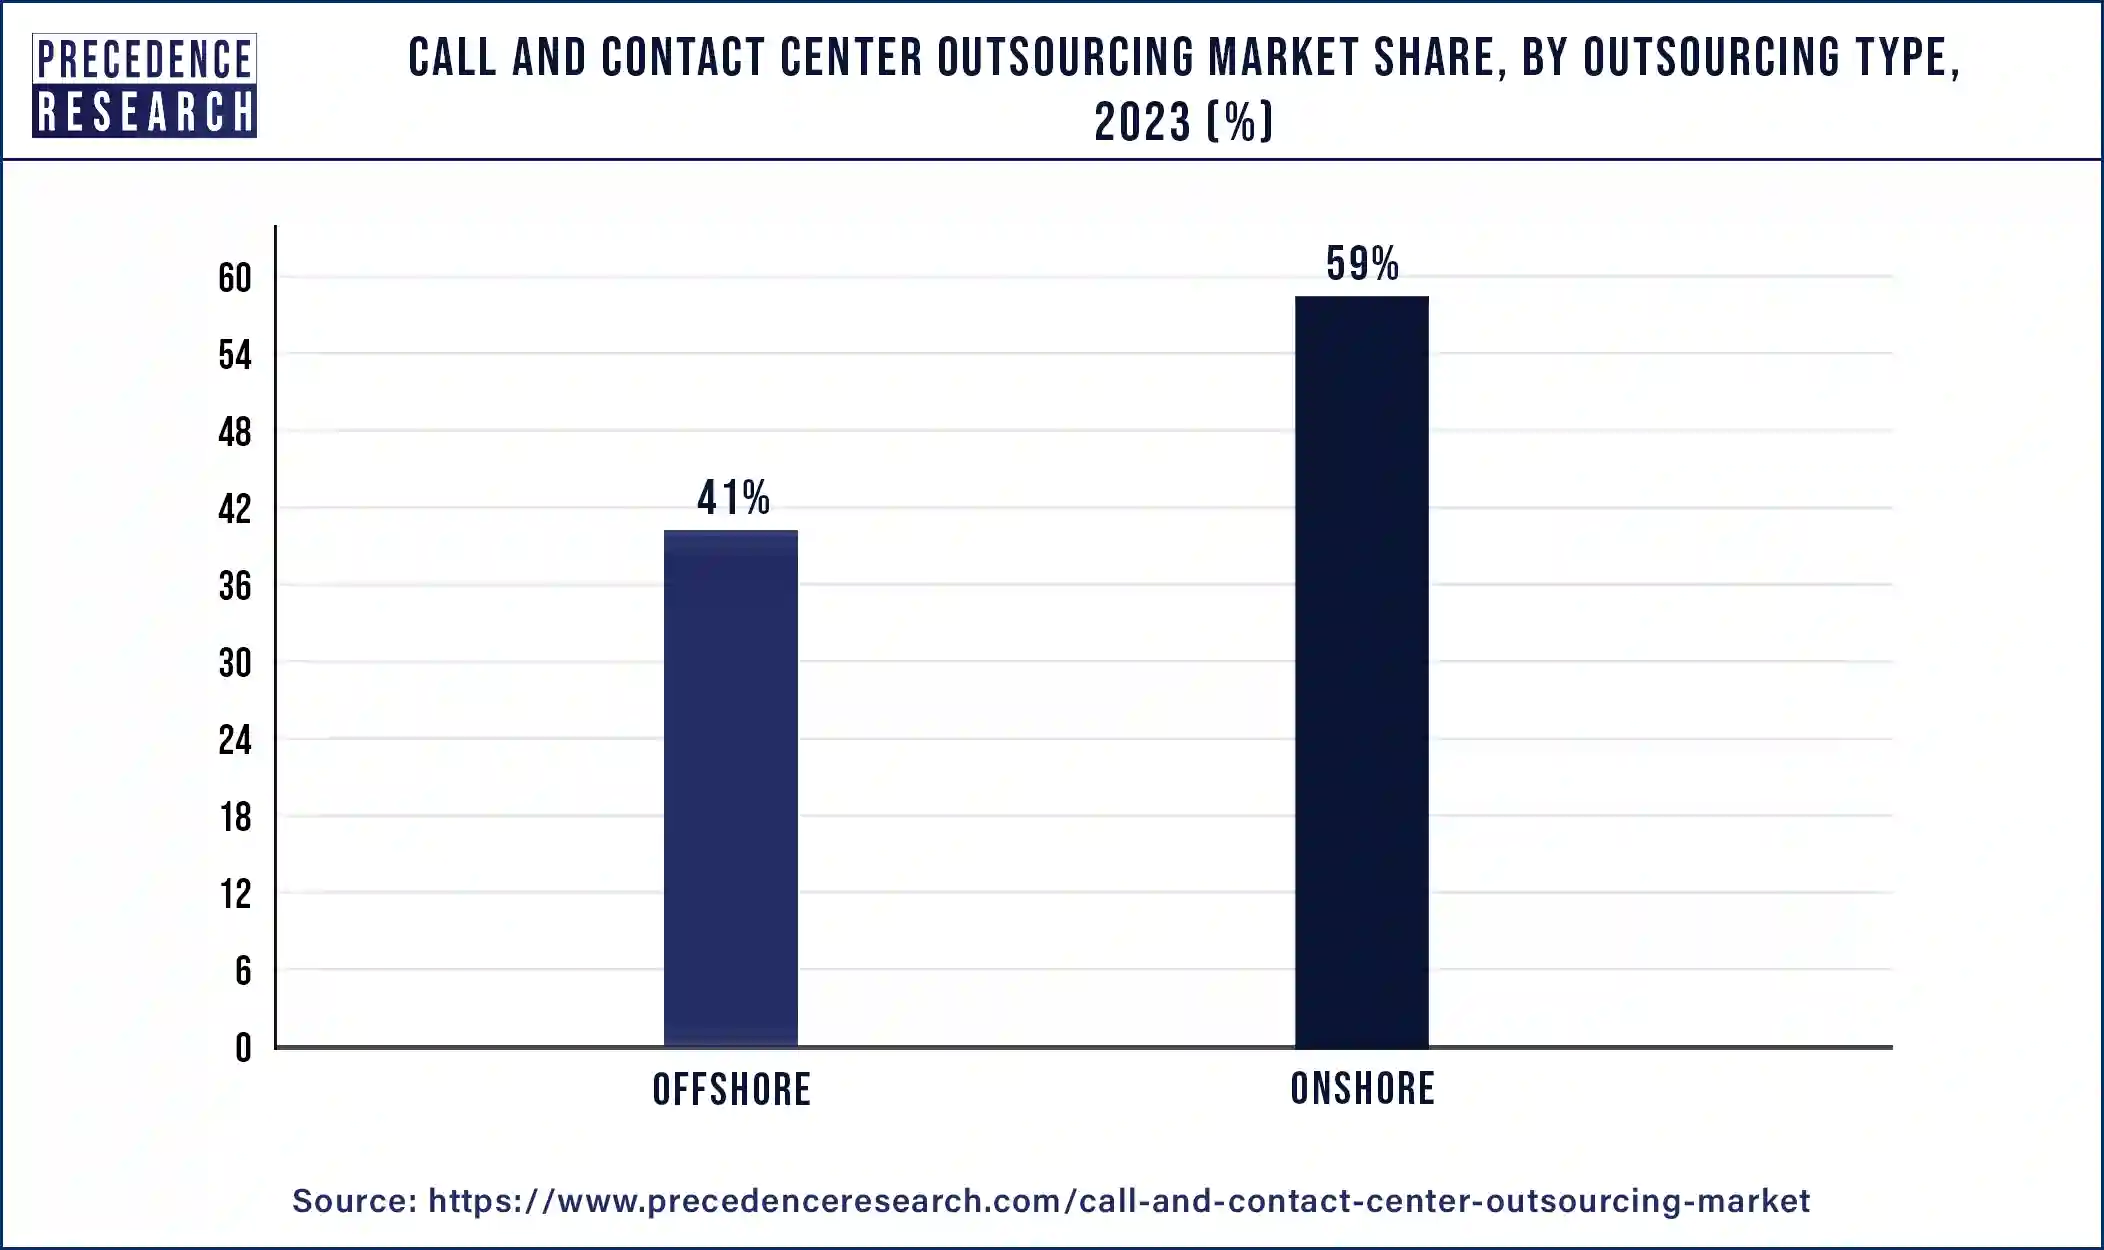 Call and Contact Center Outsourcing Market Share, By Outsourcing Type, 2023 (%)